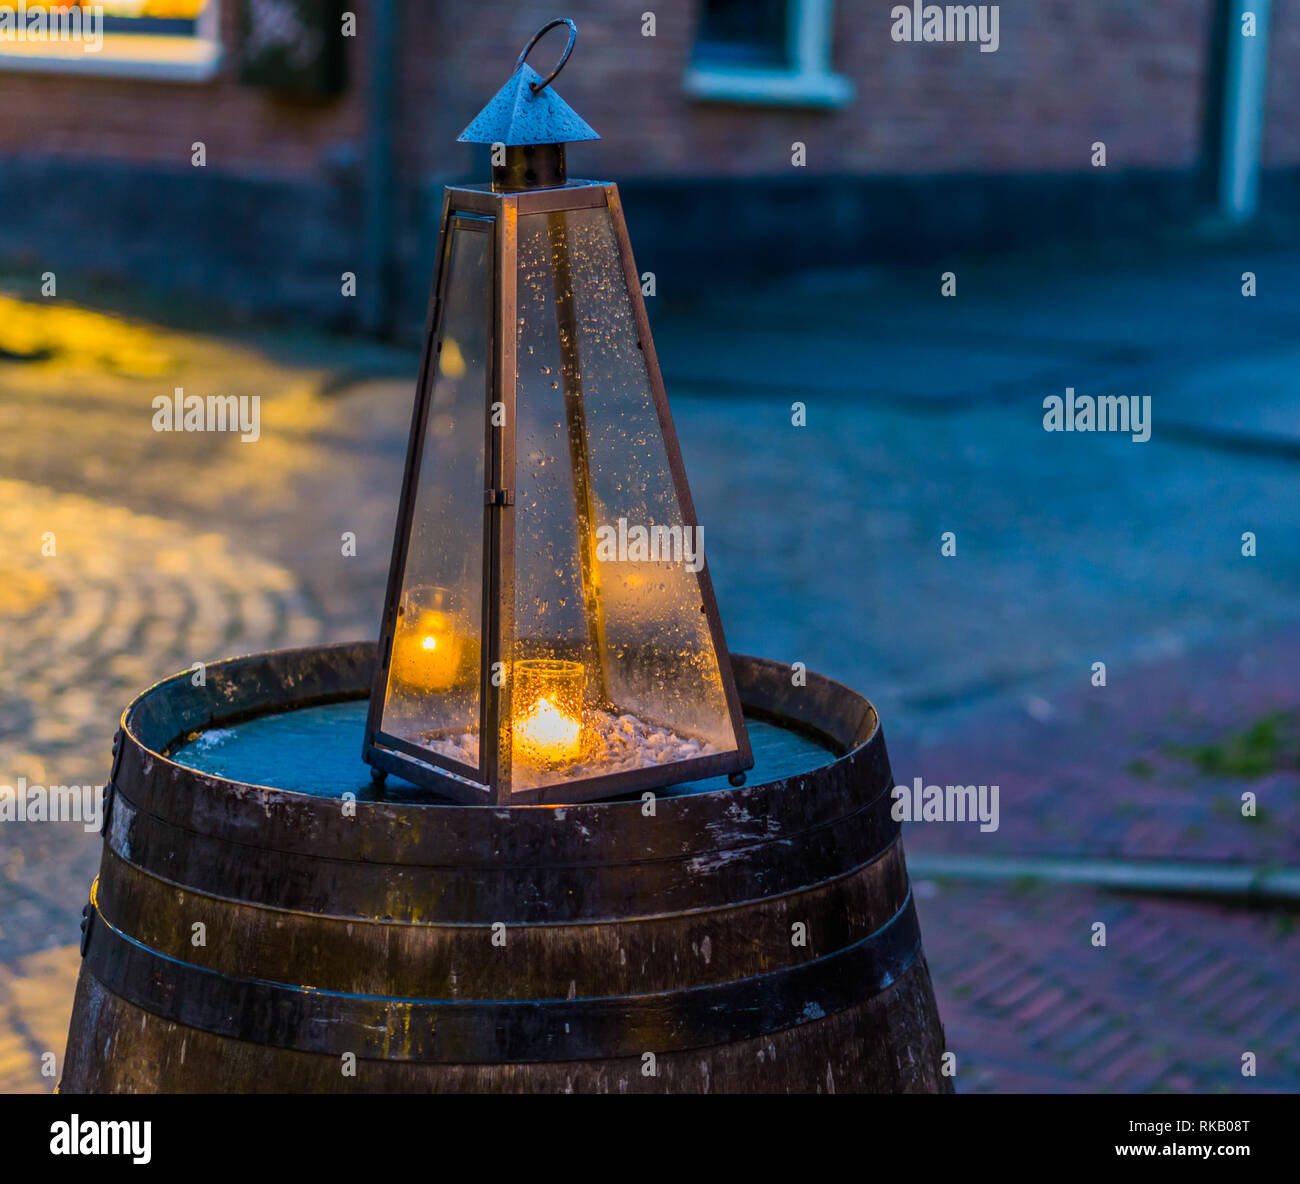 lighted candle in a glass pyramid, city light decorations Stock Photo